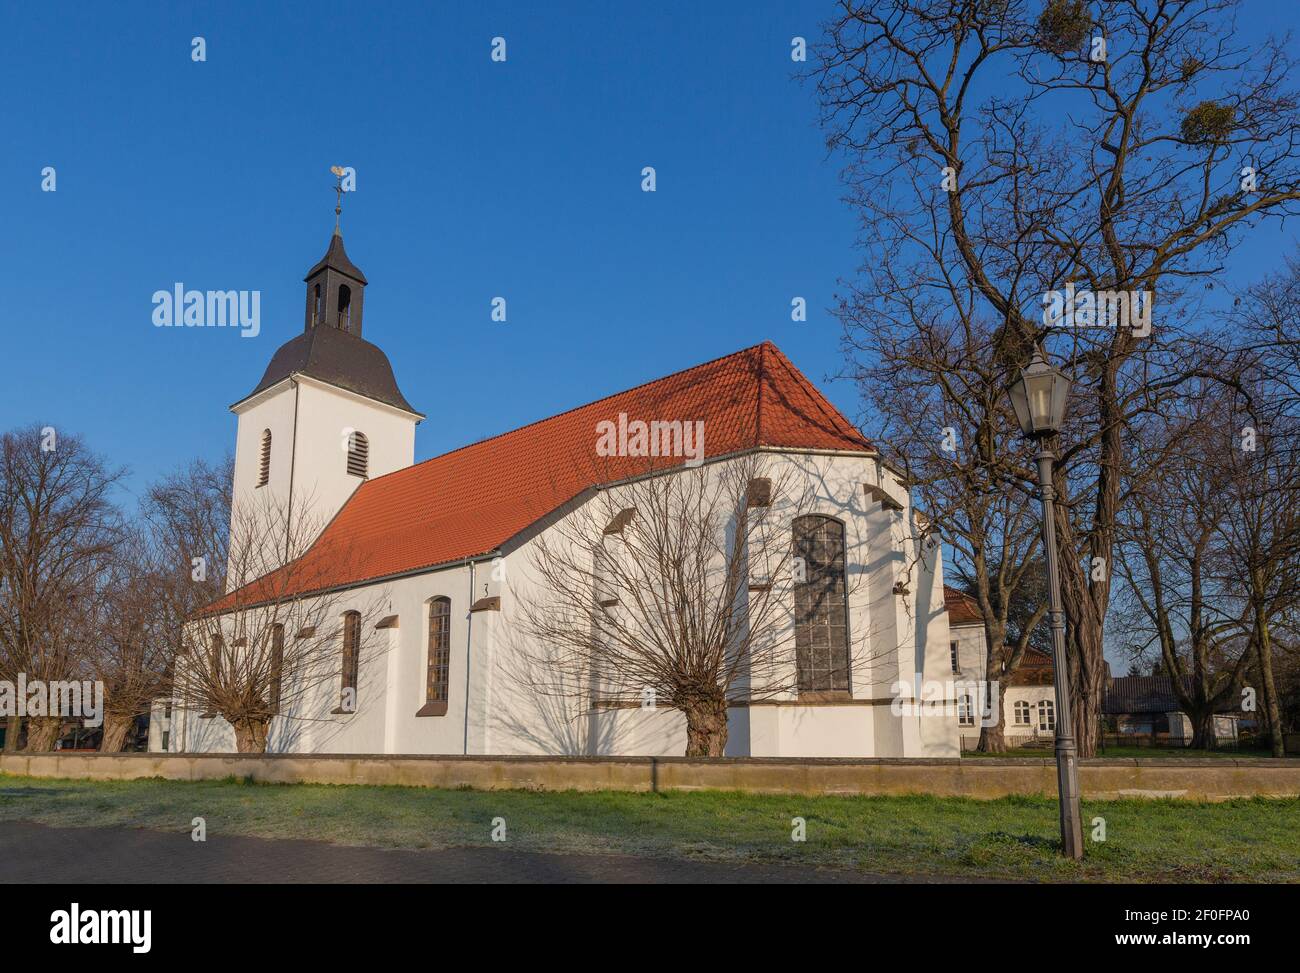 Duisburg - View to village church from aside  and evangelical since 1560, originally dedicated to Saint Martin, North Rhine Westphalia, Germany, 07.03 Stock Photo